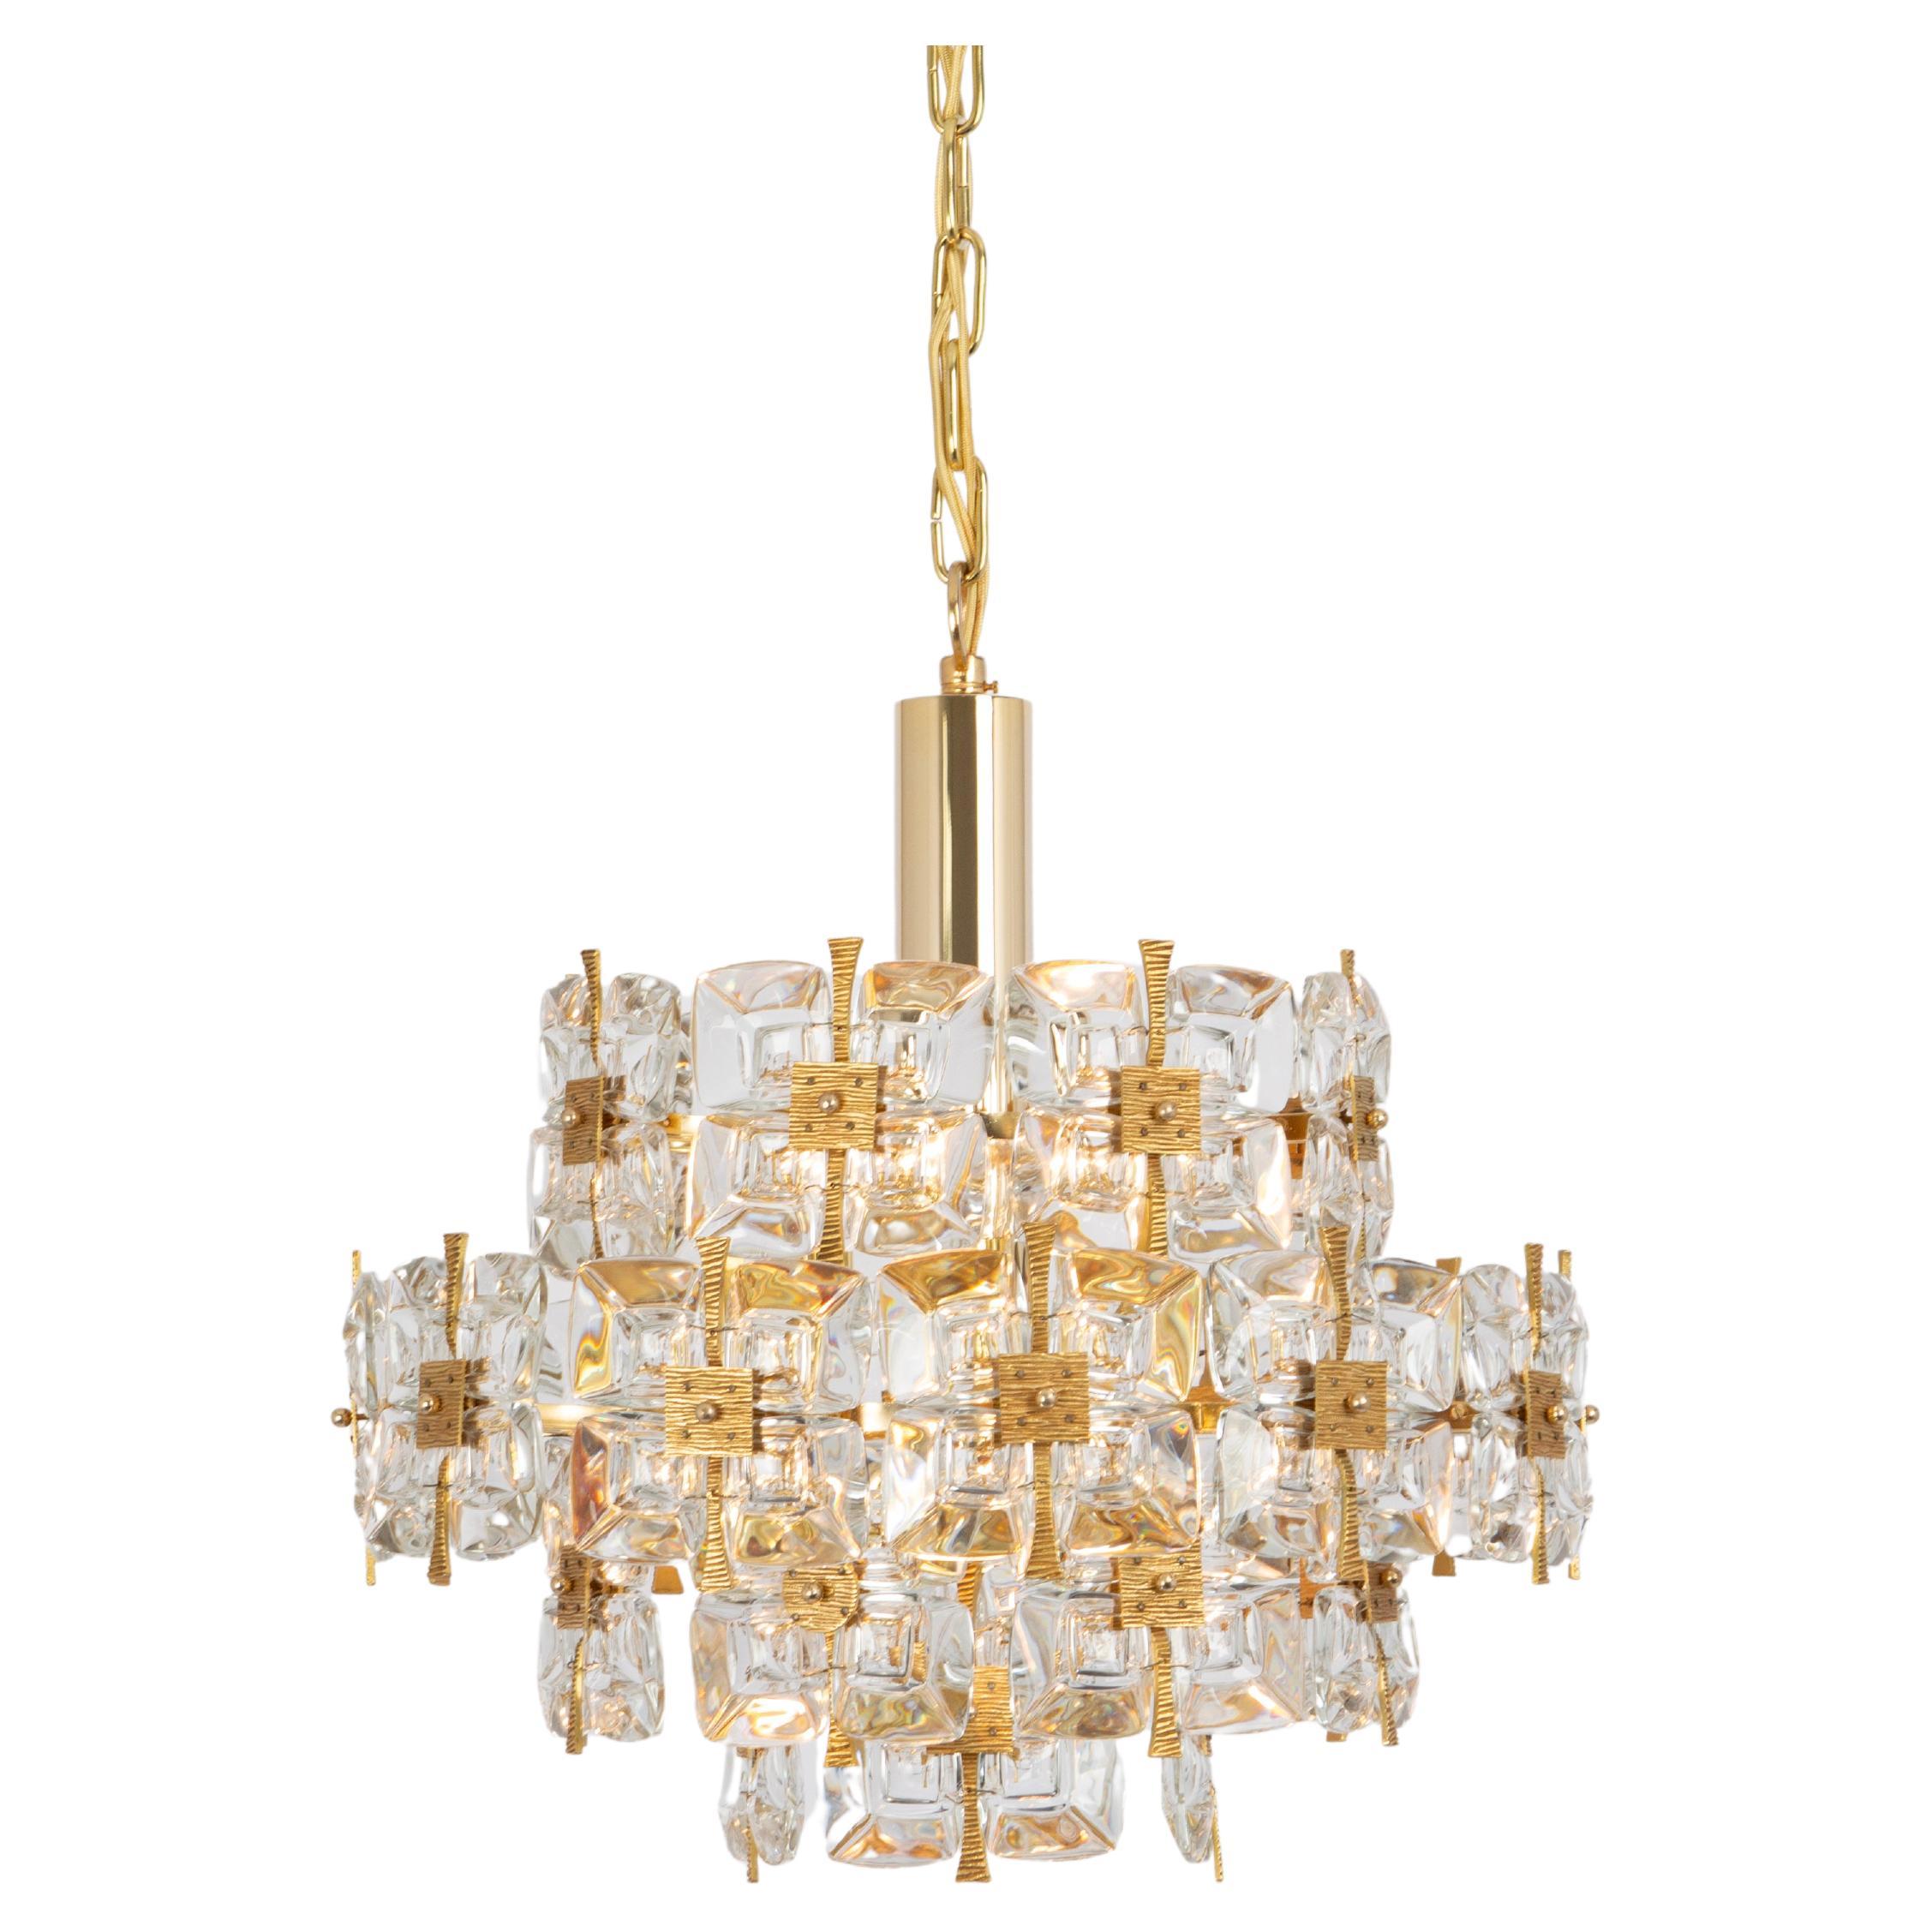 Gilt Brass and Crystal Chandelier, Sciolari Design by Palwa, Germany, 1970s For Sale